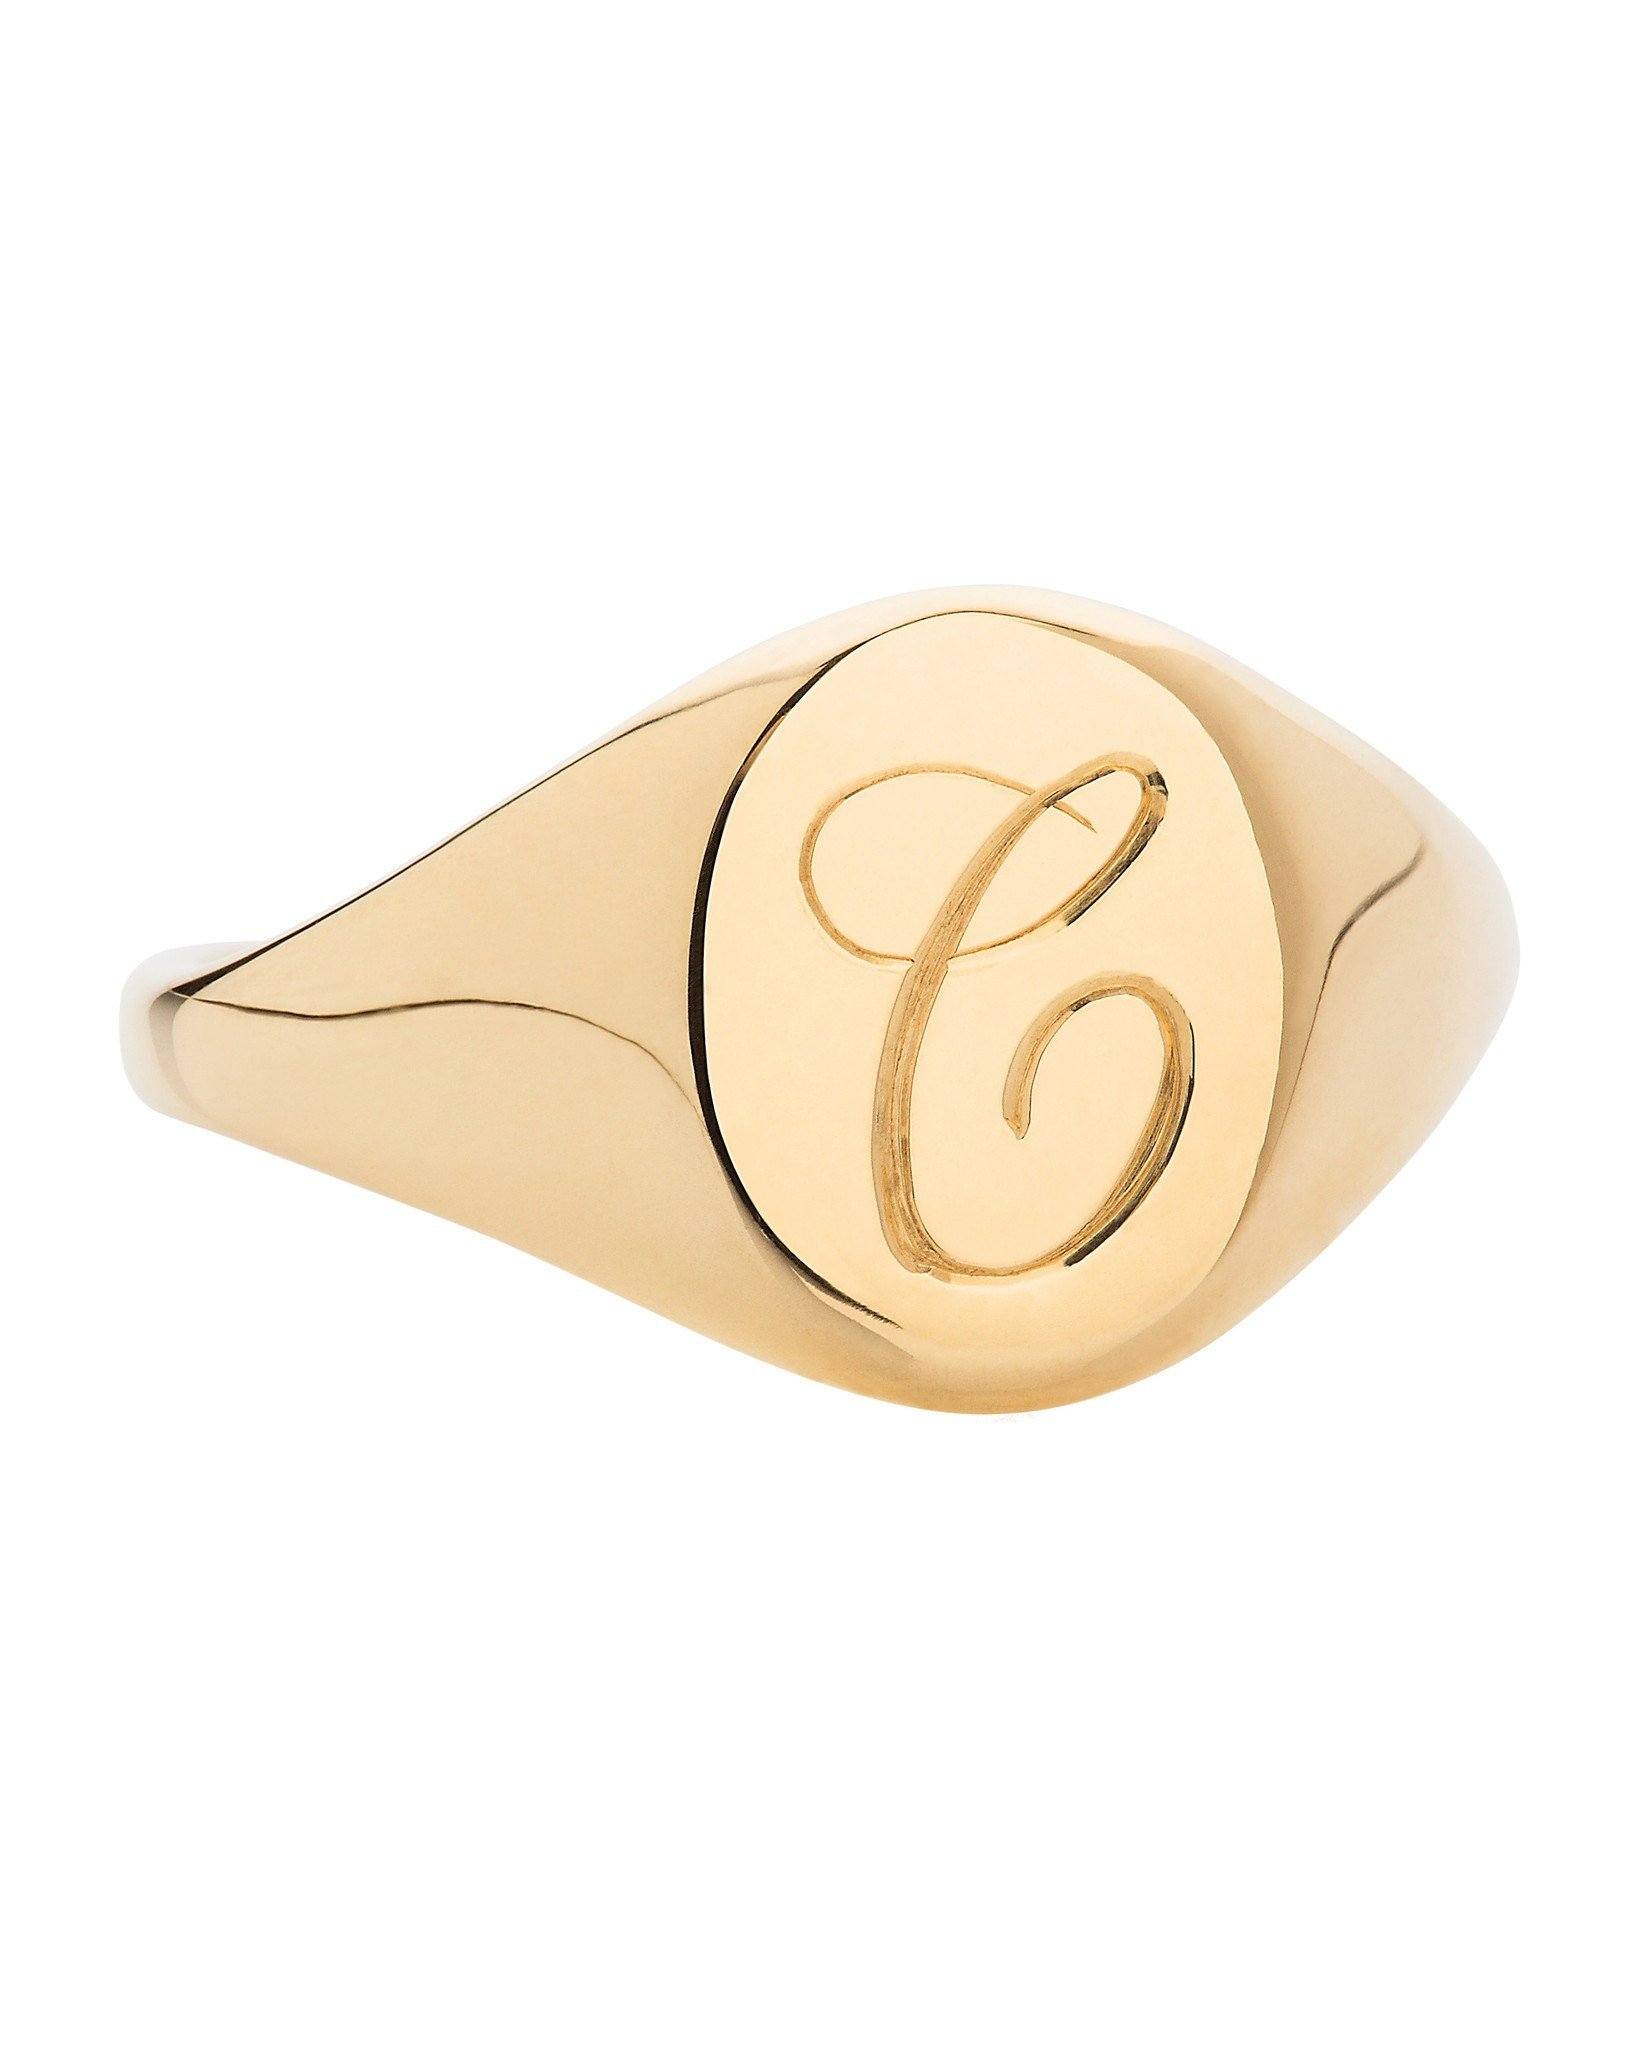 Personalised Initial Signet Ring - Laura Lee Jewellery - 9ct Yellow Gold - Personalised Ring UK